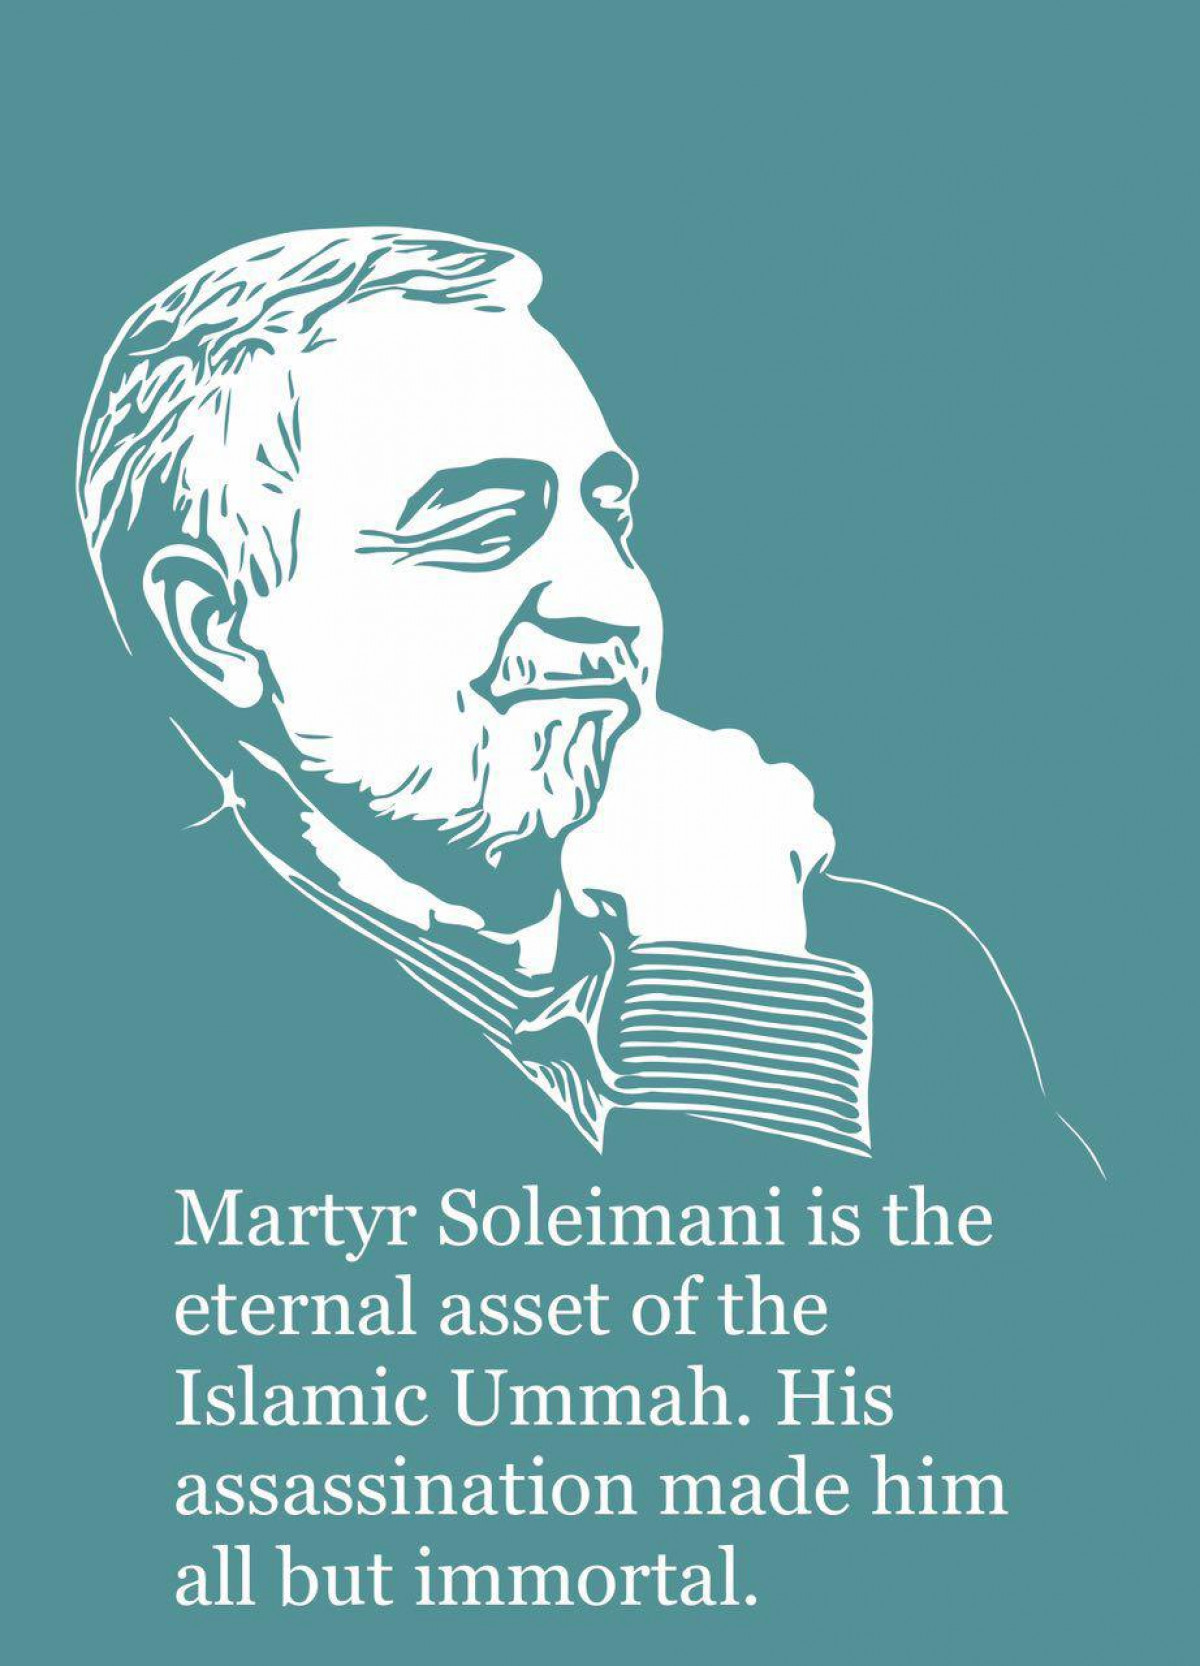 Martyr Soleimani is the eternal asset of the Islamic Ummah